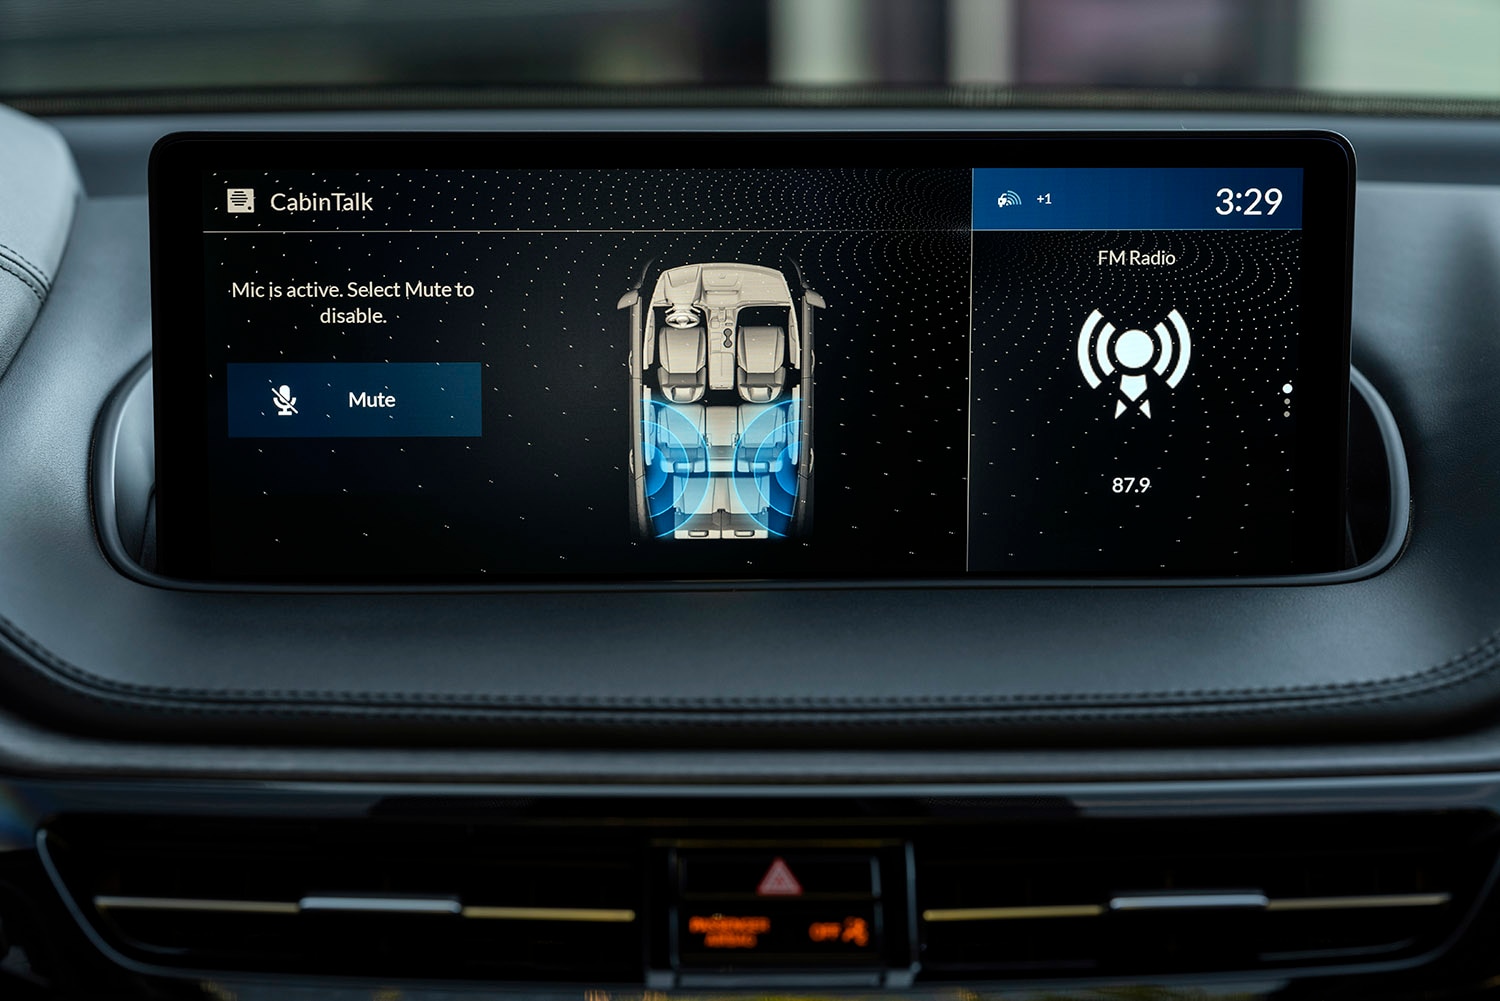 View of 2022 Honda MDX's infotainment screen with CabinTalk active